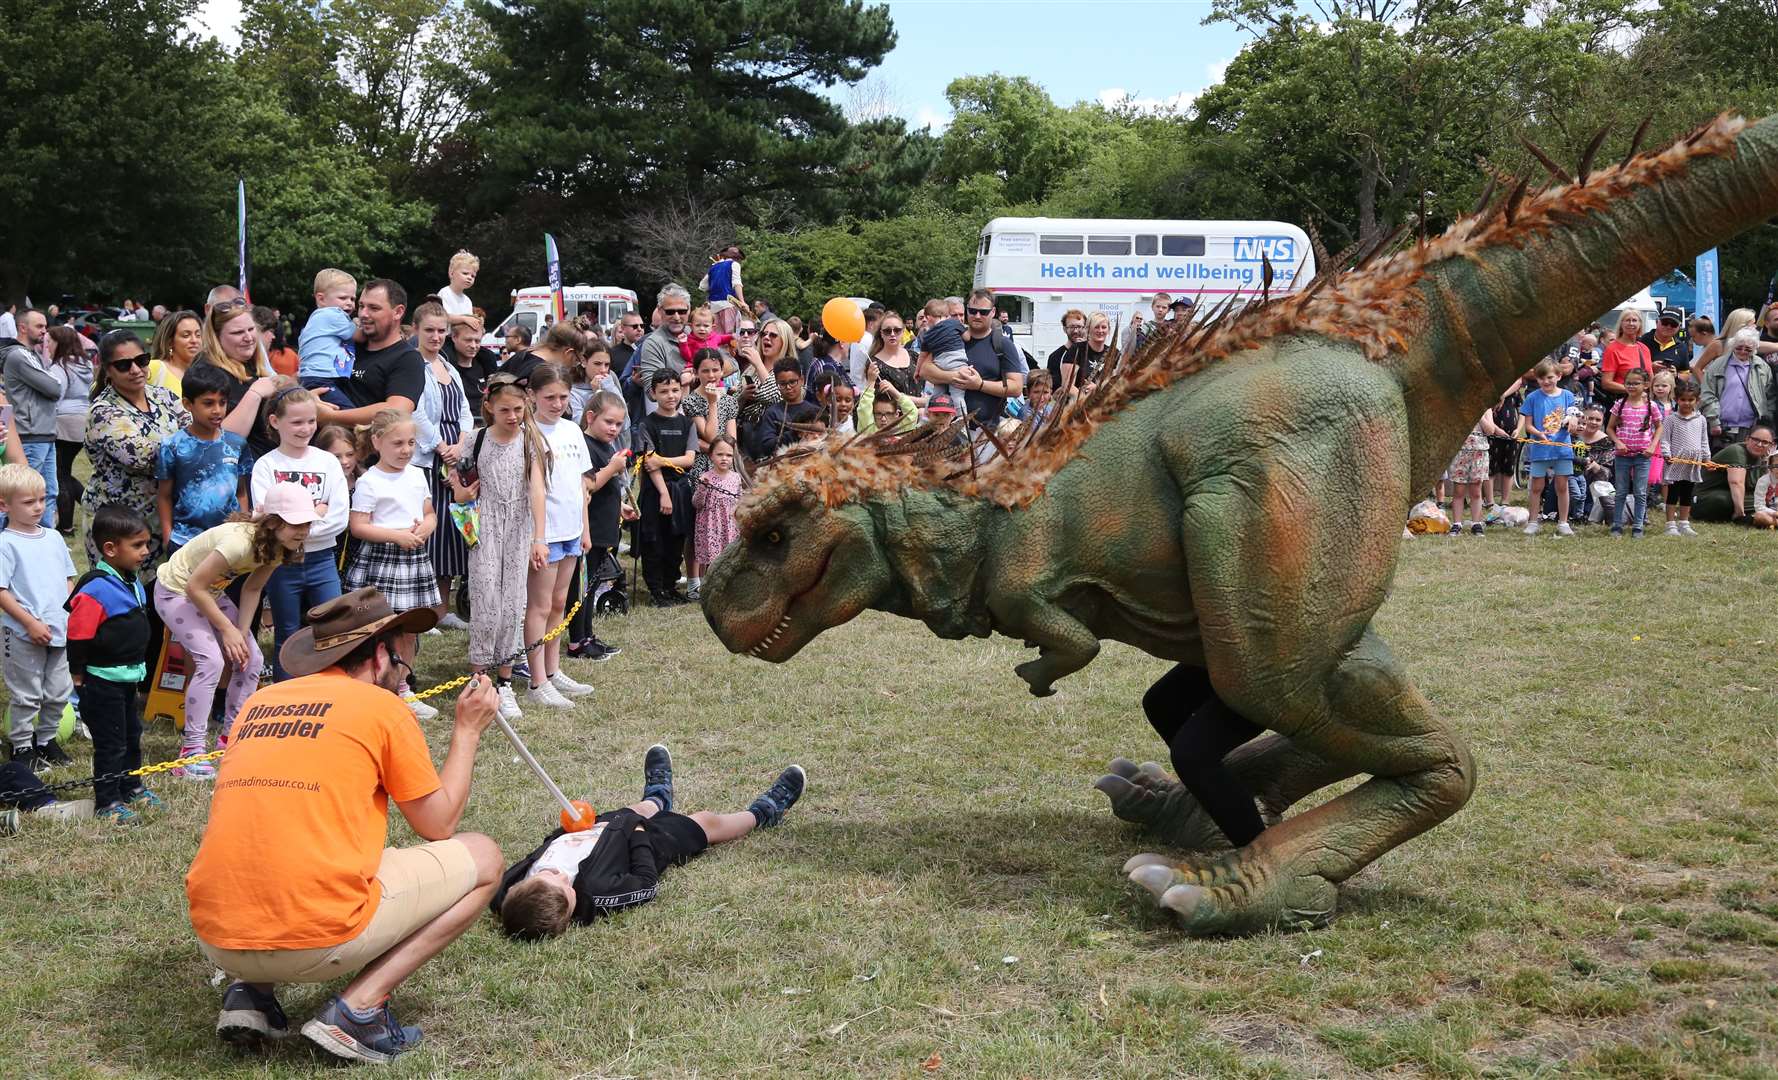 Roaming dinosaurs pleased the youngsters. Pics by Dartford Borough Council/ Andy Barnes Photography